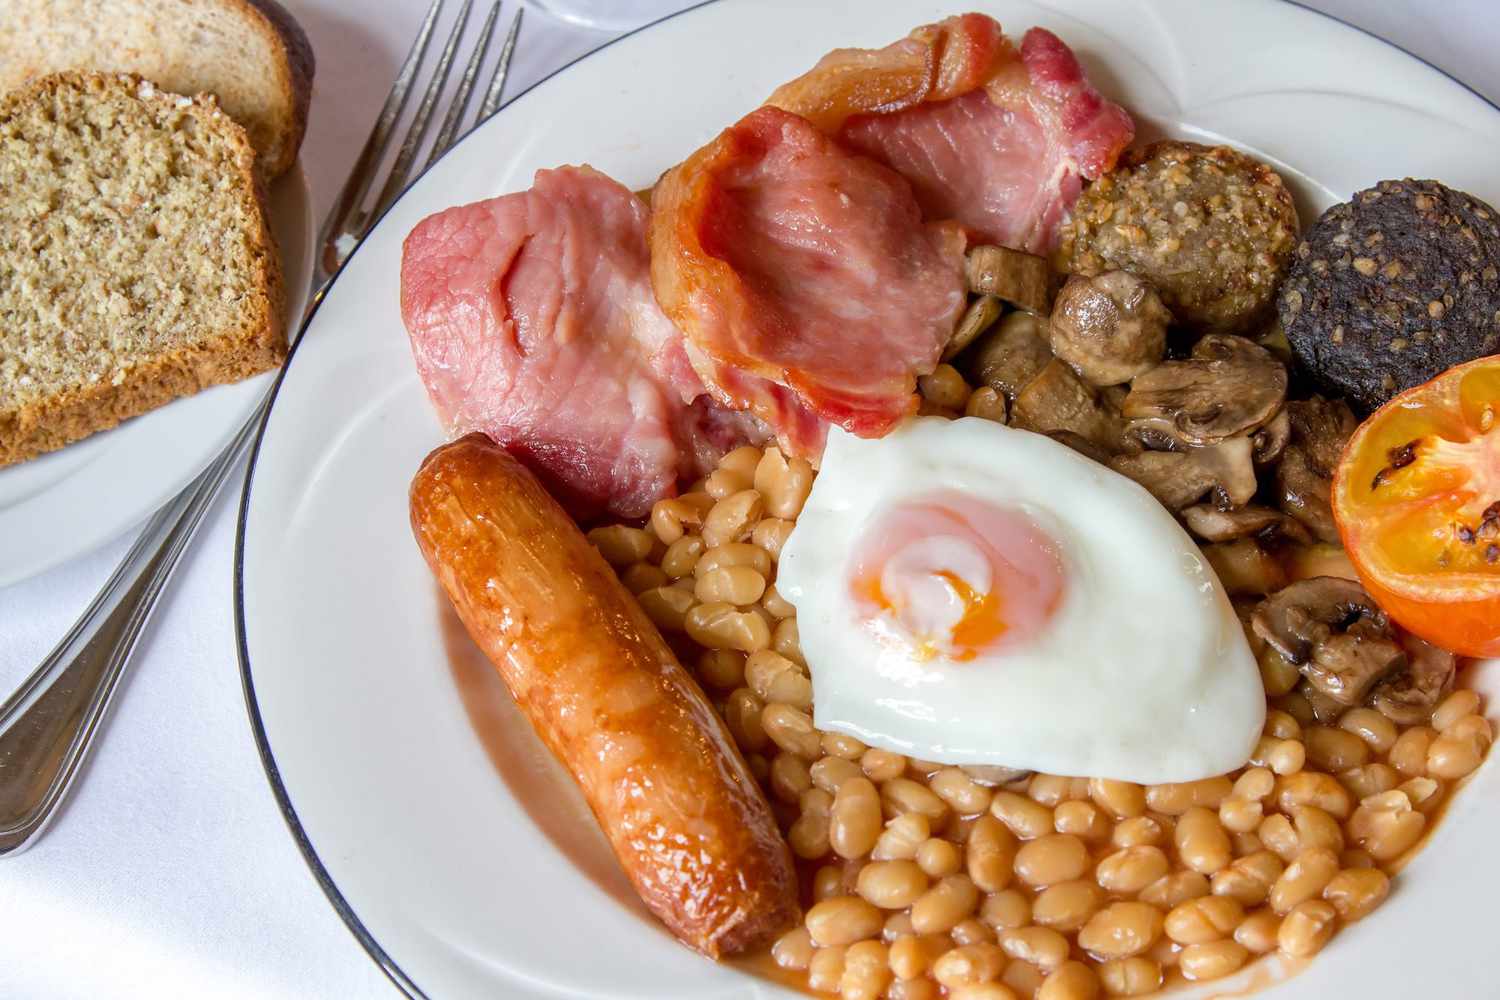 plate of baked beans, eggs, and meats